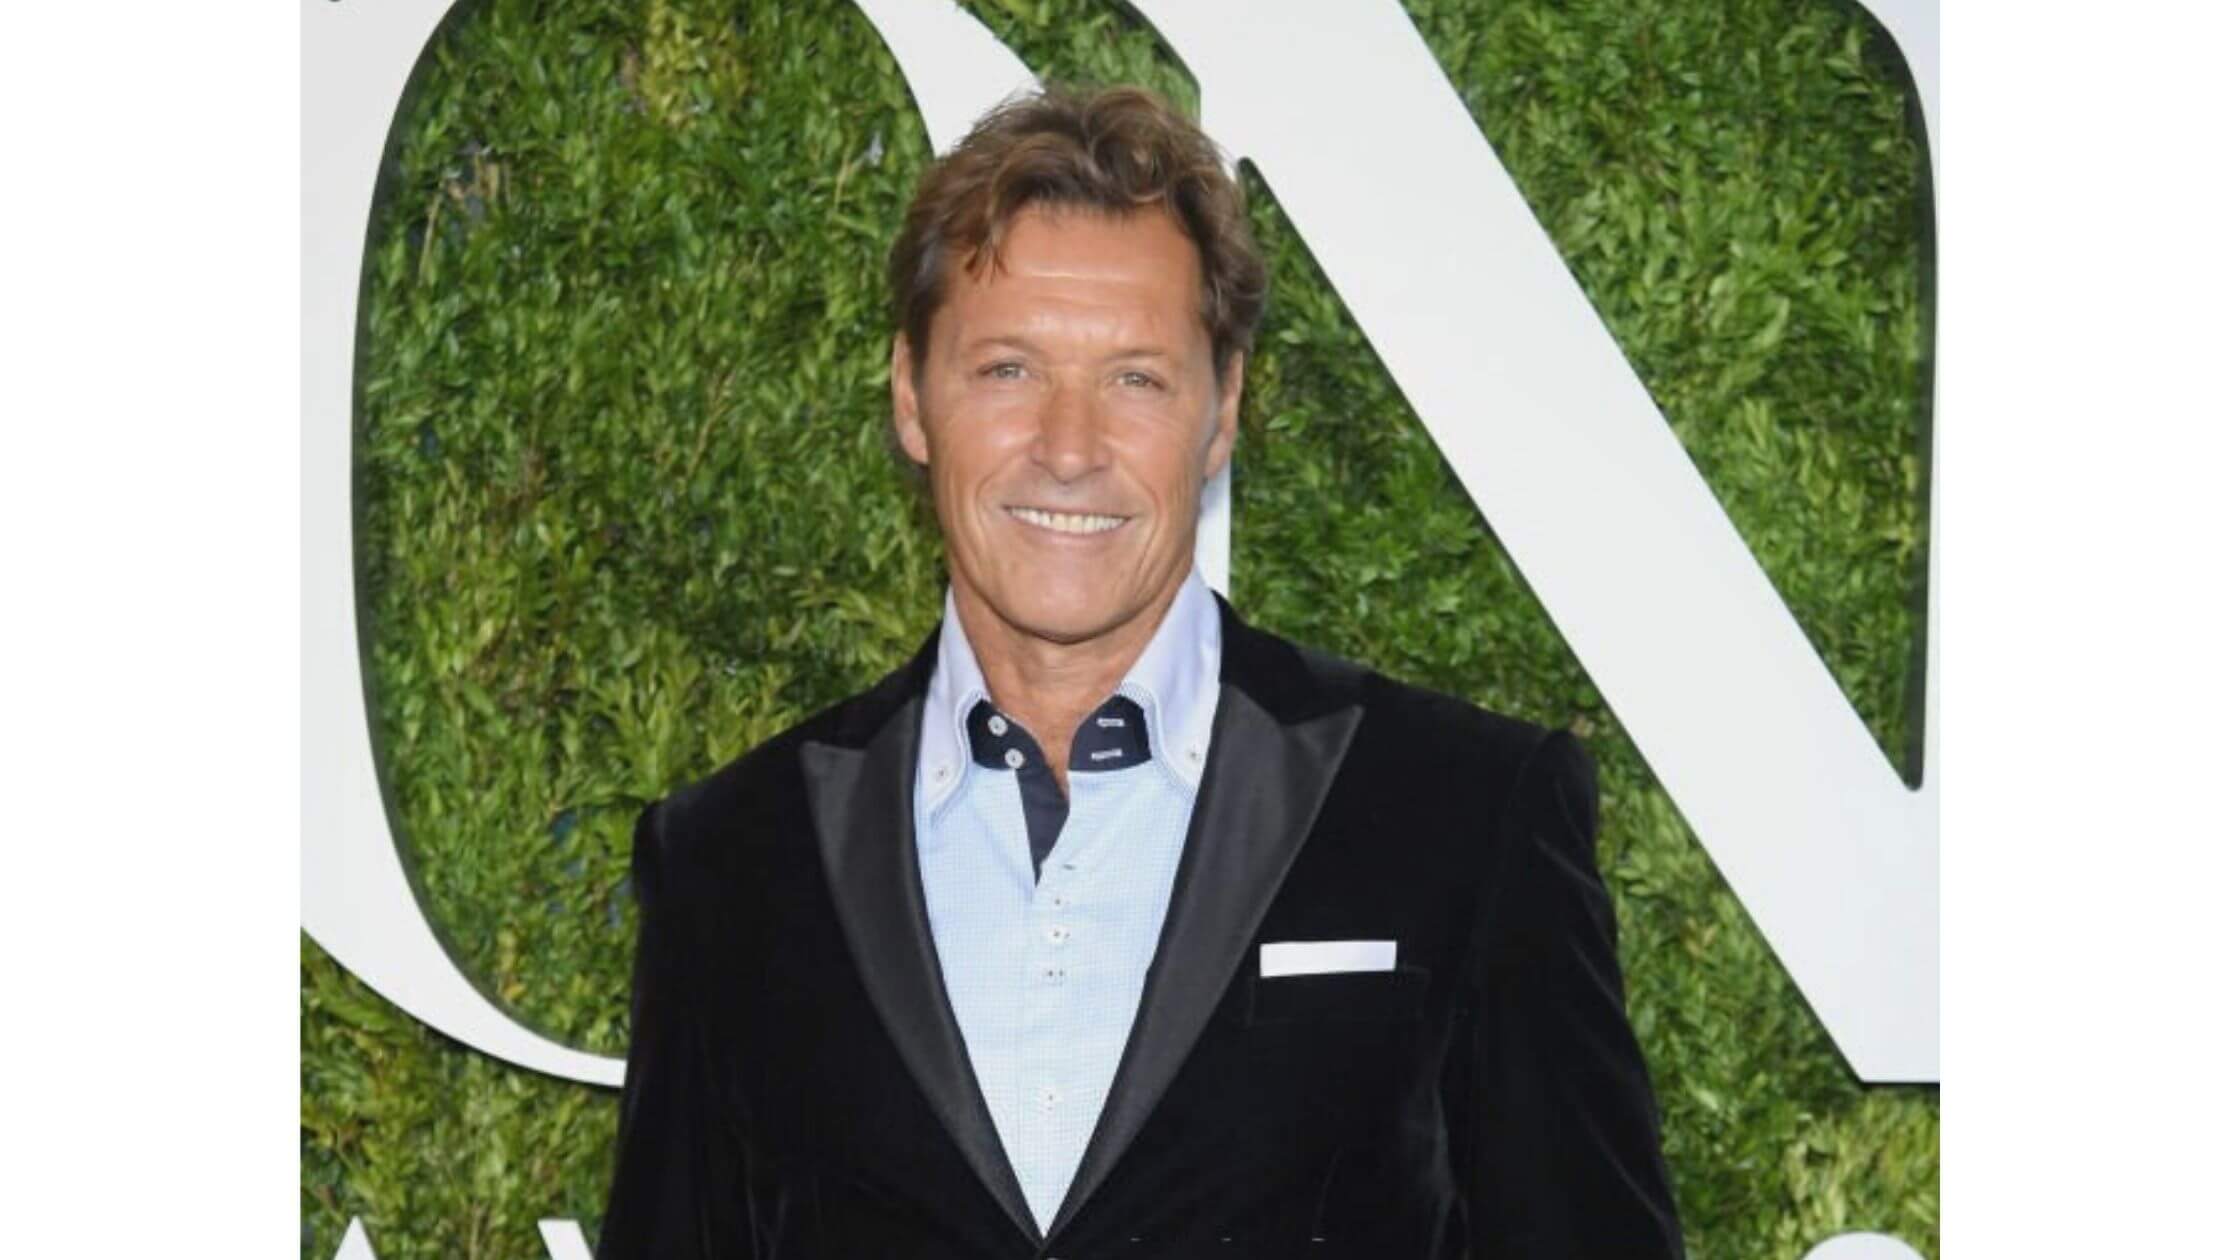 Meet Sarah Palin's New Boyfriend Former NHL Player Ron Duguay: Who Is Ron Duguay? Ron Duguay Bio, Wiki, Career, Net Worth, Relationship, Height, And Weight